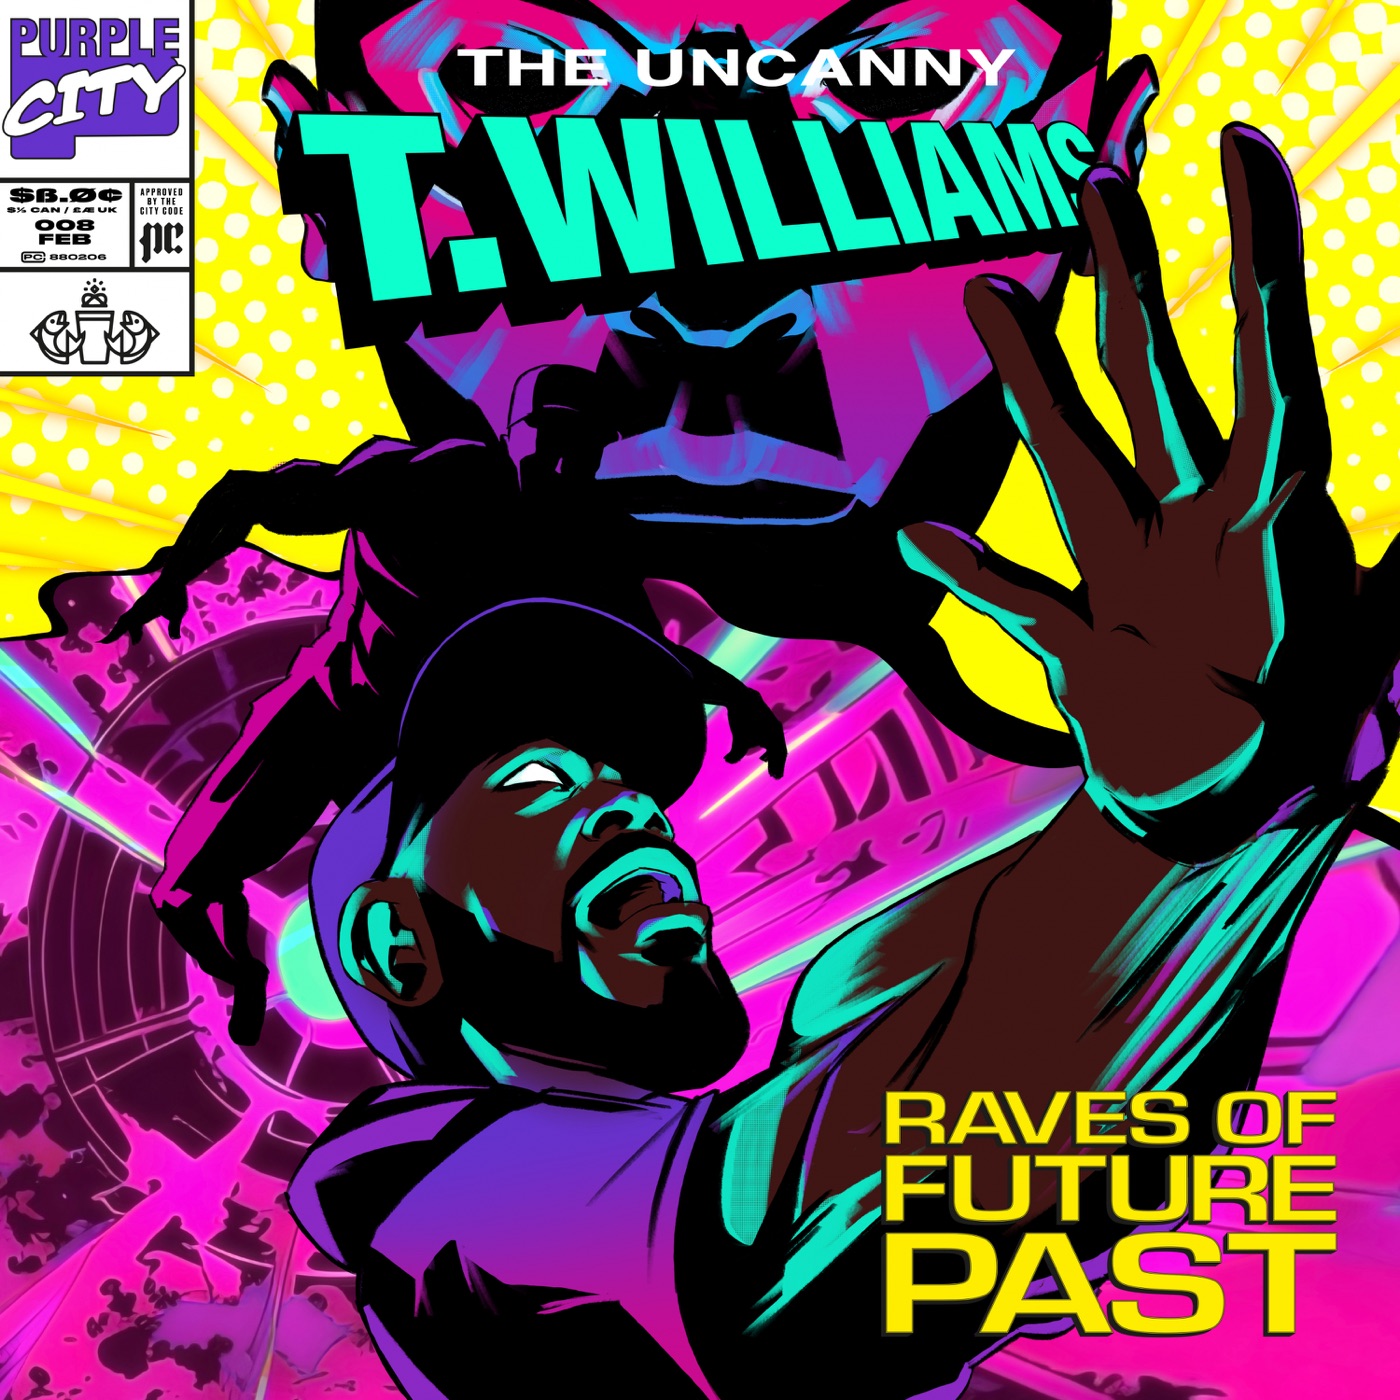 Raves of Future Past by T.Williams